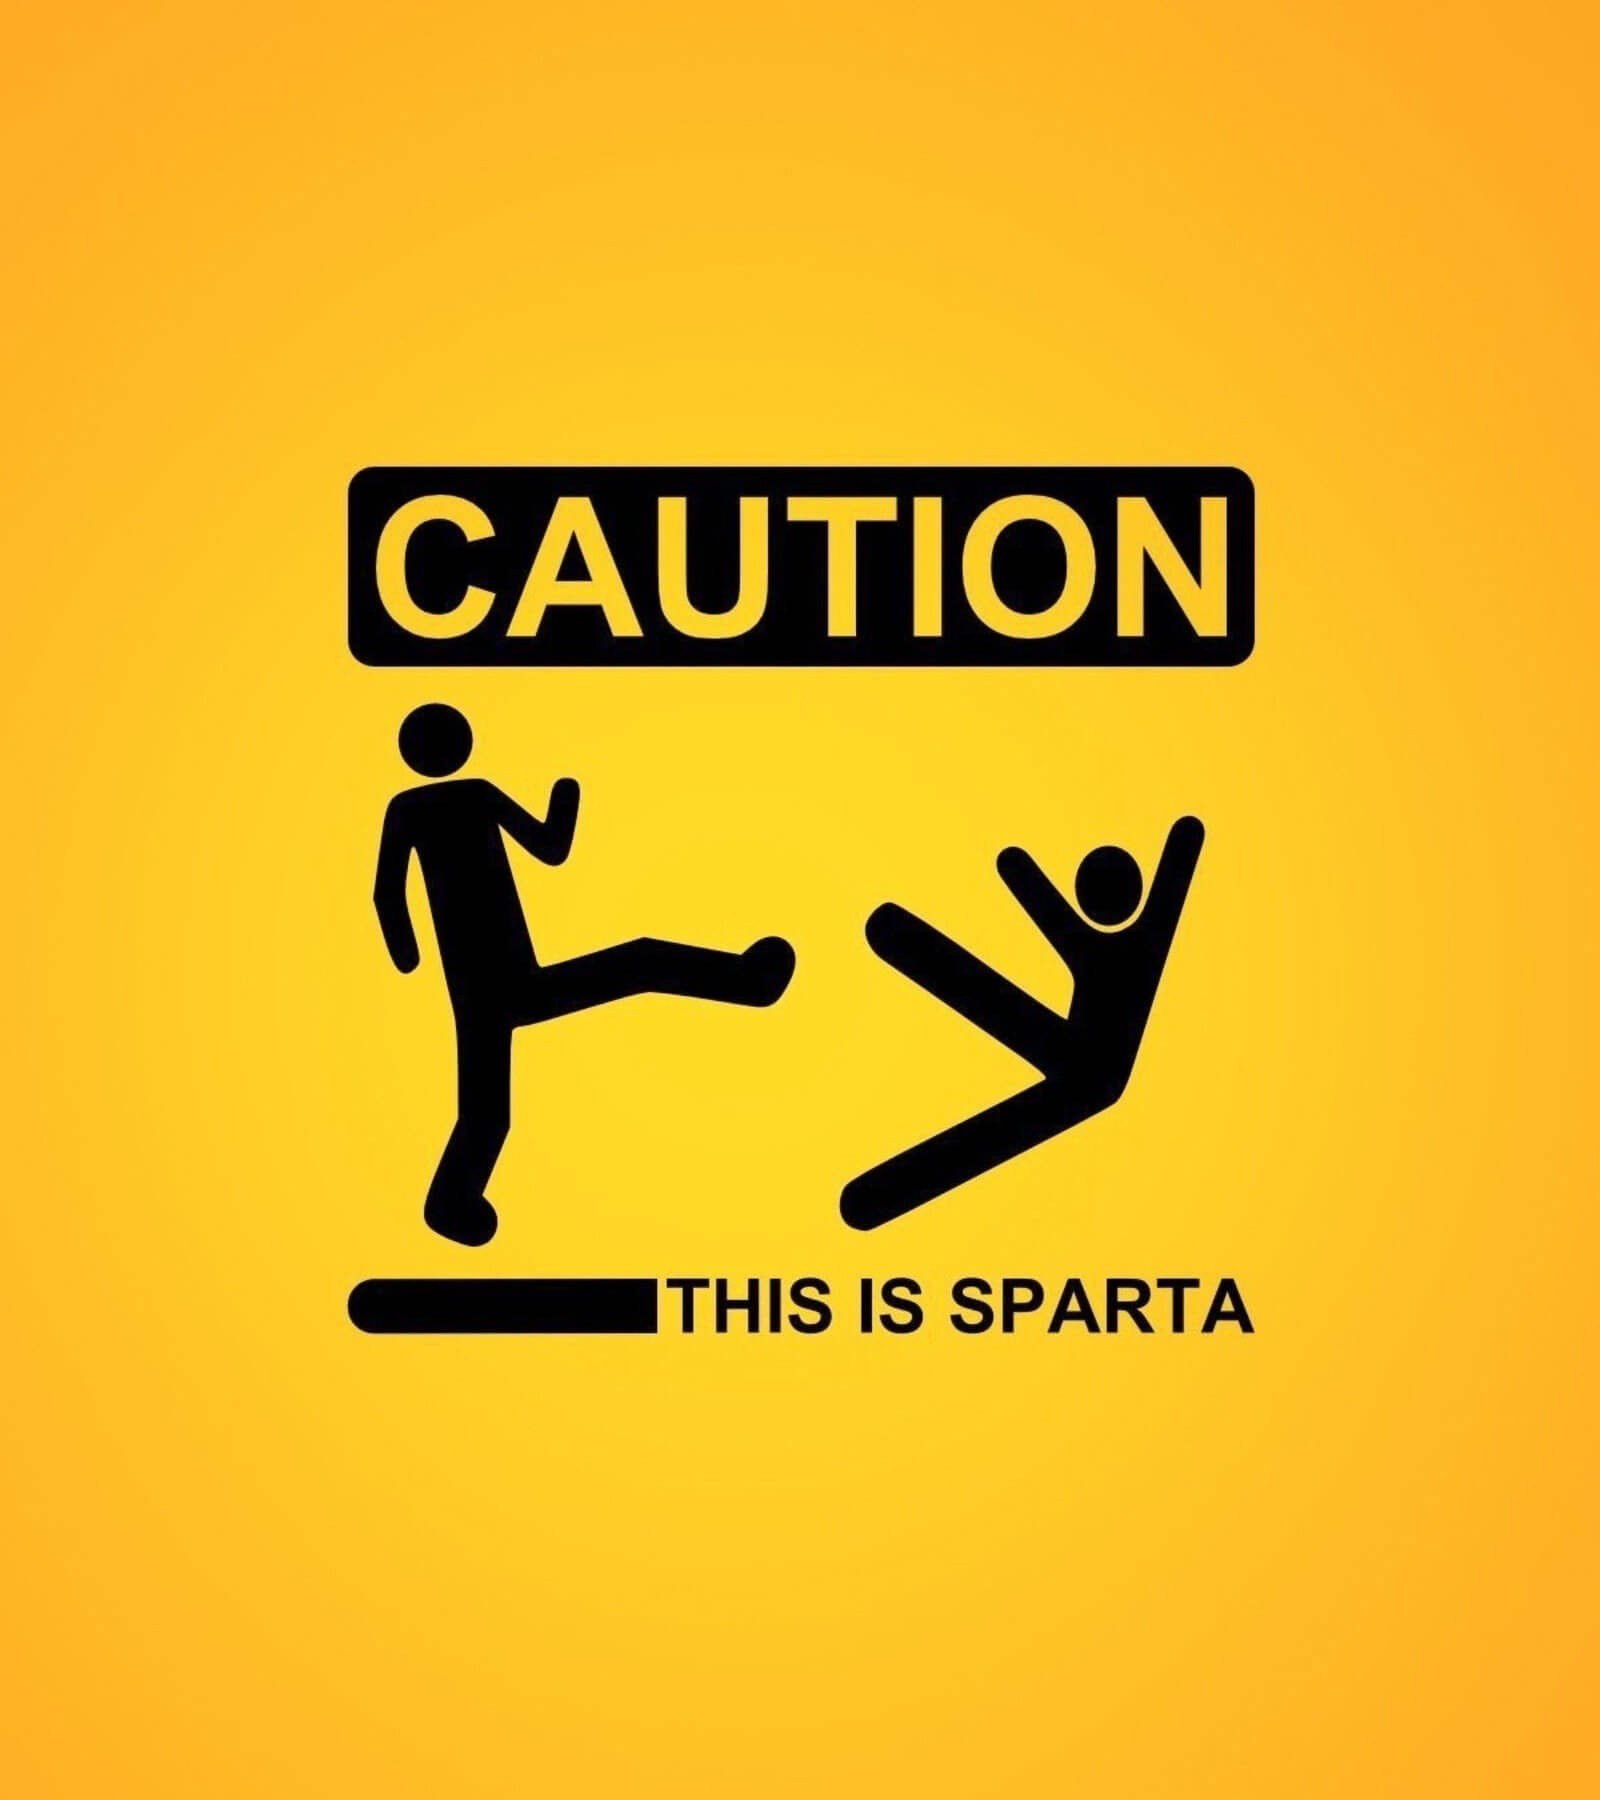 Caution This Is Sparta Wallpaper For Kindle Fire HDx Jpg